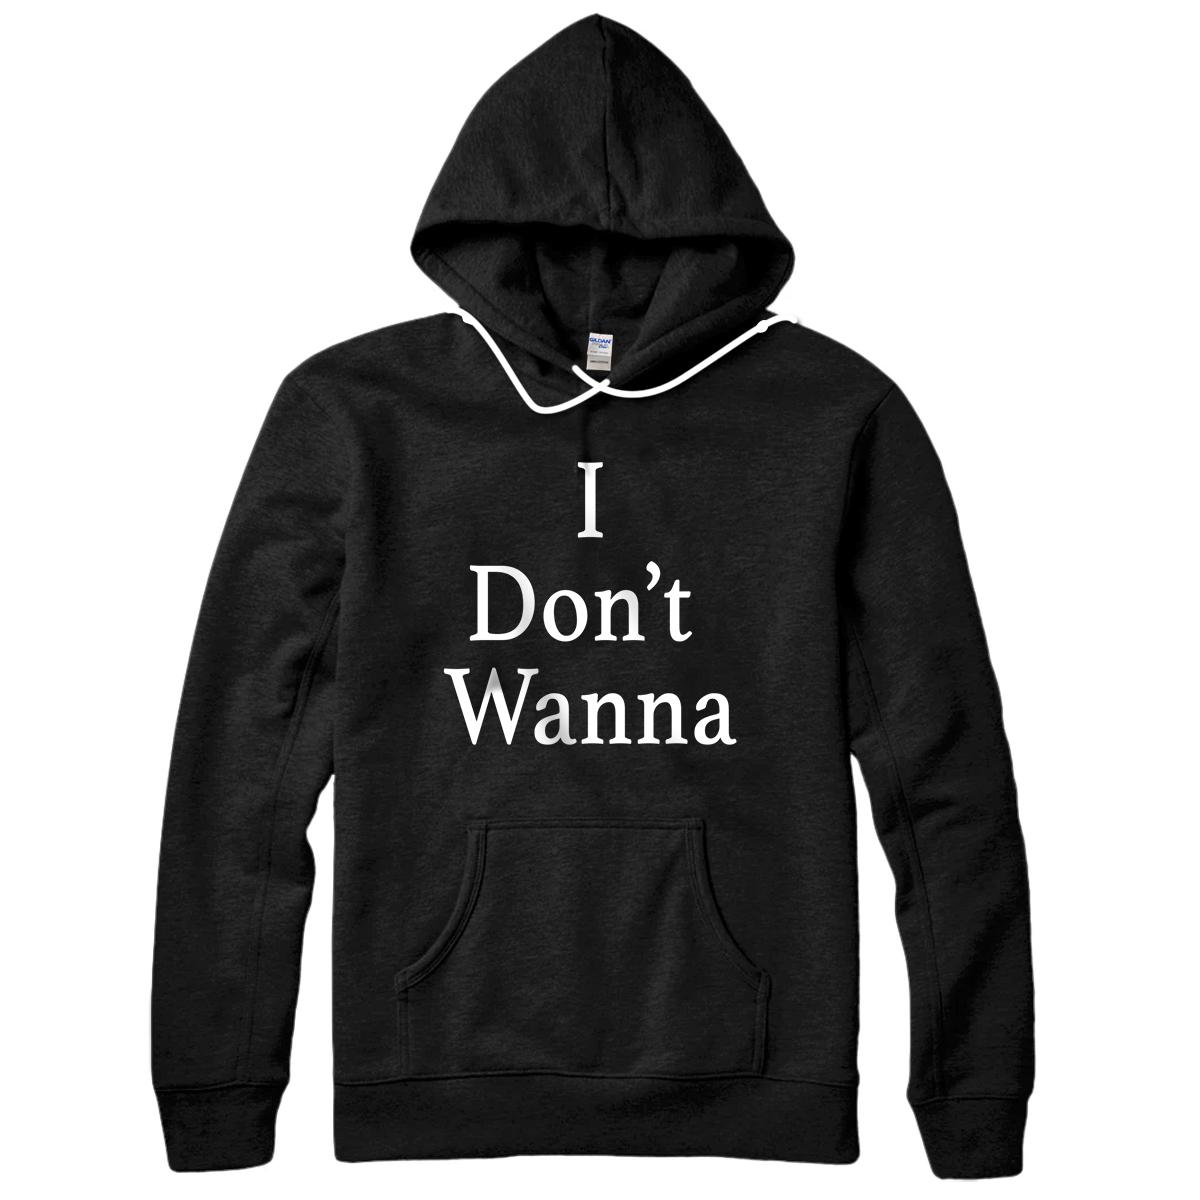 Personalized I Don't Wanna Graphic Design Apparel Girl Boy Adult Gift Pullover Hoodie